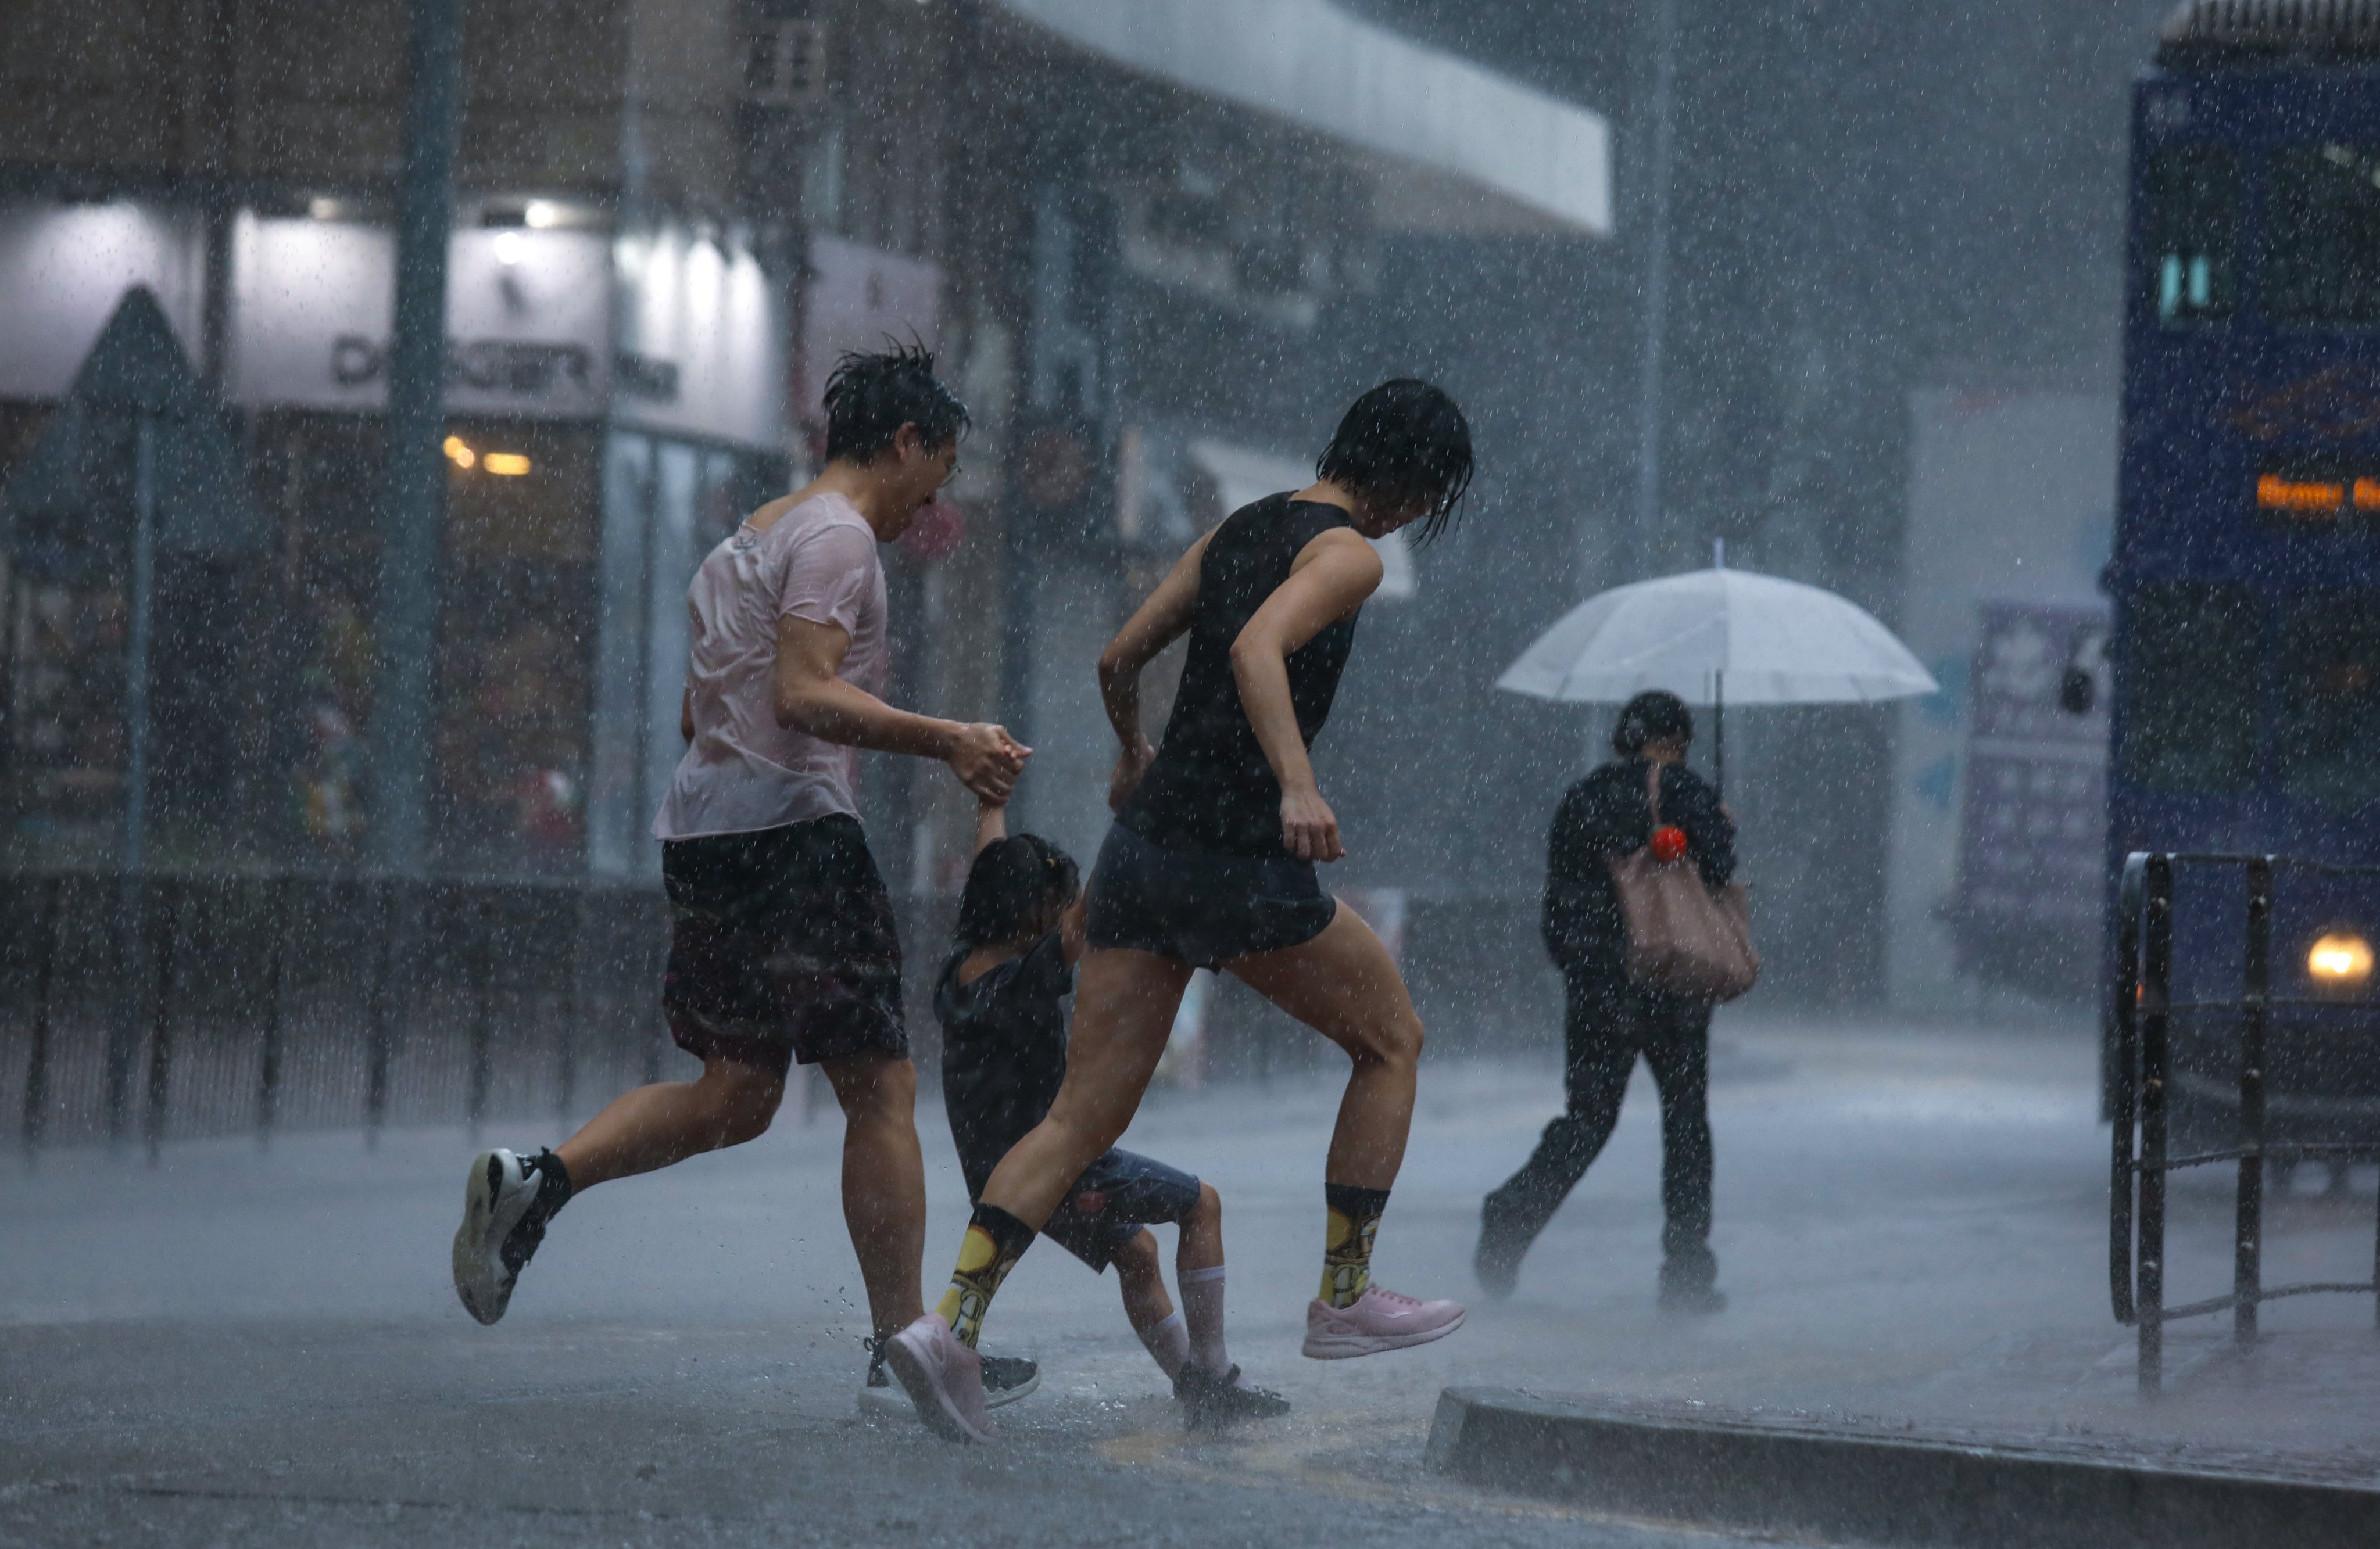 Rain ‘will be heavier at times in some areas with thunderstorms’, says forecaster. Photo: Xiaomei Chen